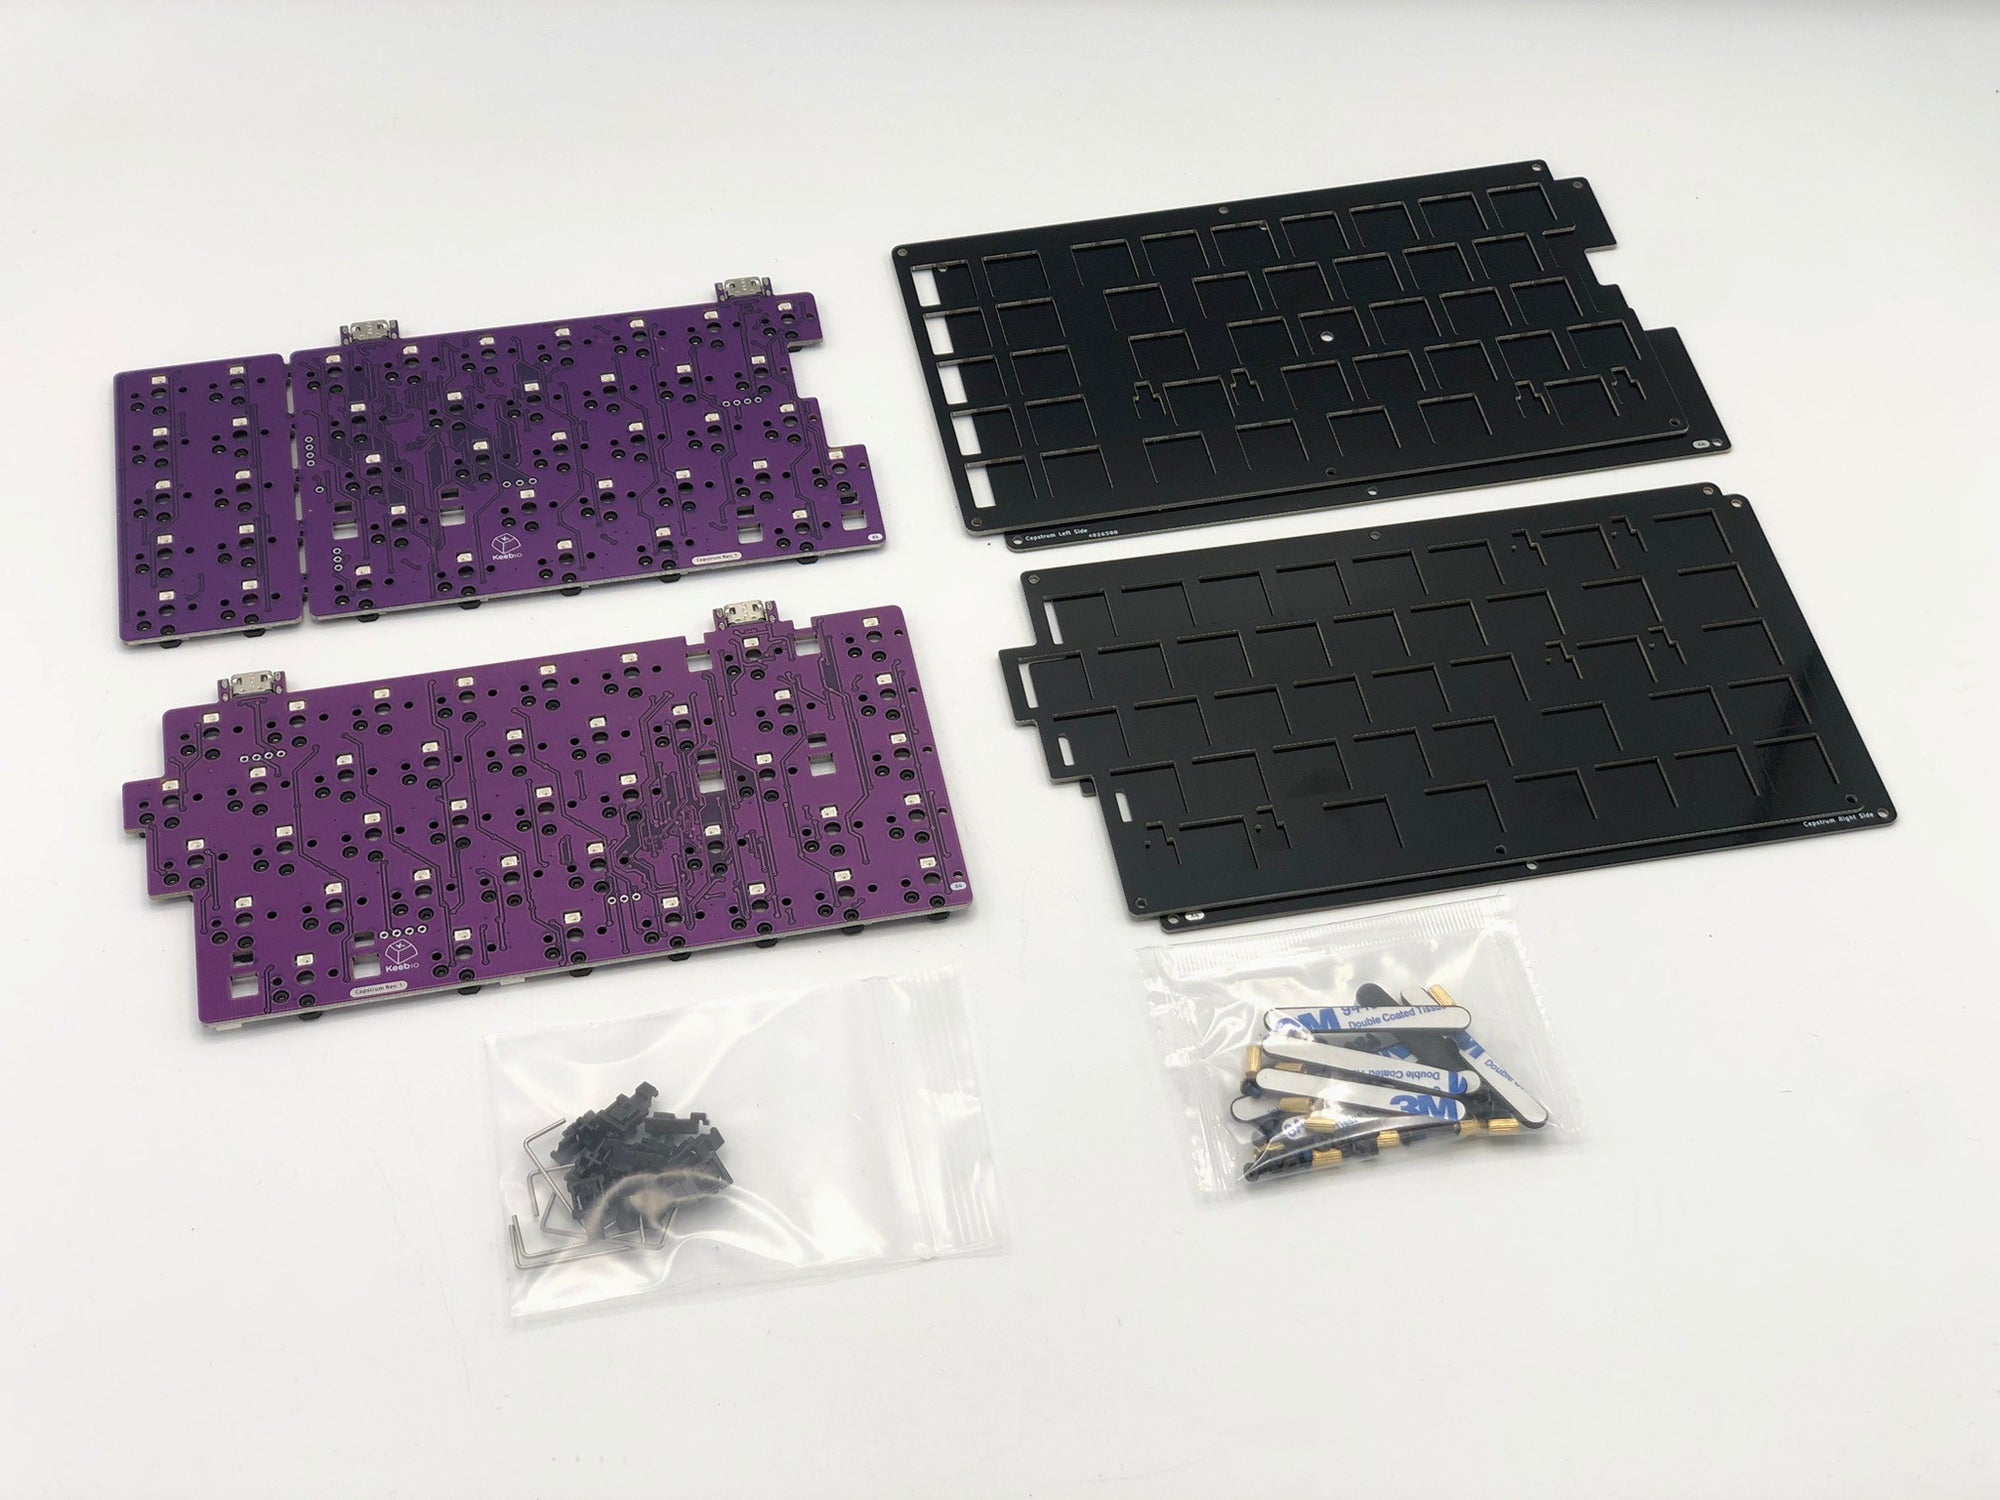 Bare Cepstrum PCB, switch plate, bottom plates, a baggie with choc stablizer pieces, and a pouch with screws, standoffs, and SKUF feet.